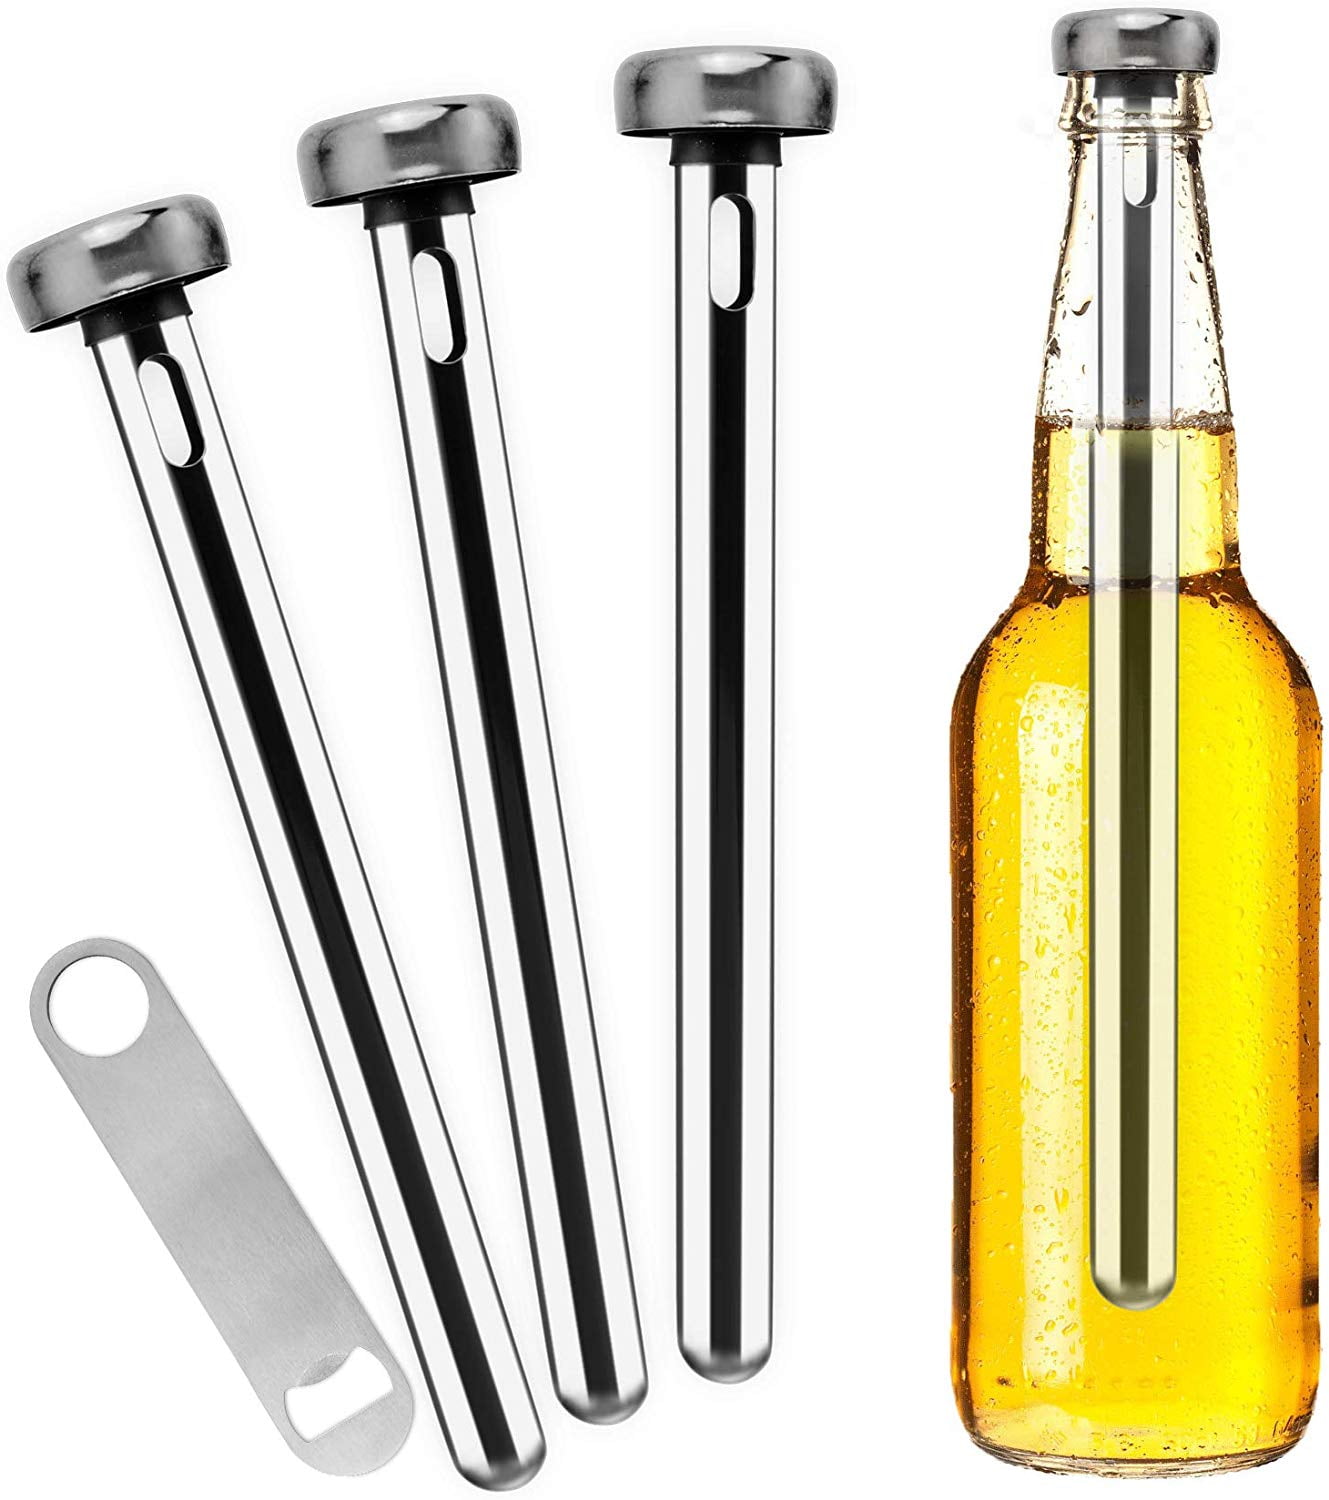 Best Portable Beverage Wine Instant Cooling Sticks Winxer Beer Chiller Stick Set of 2 Stainless Steel Bottle Chill Rod 